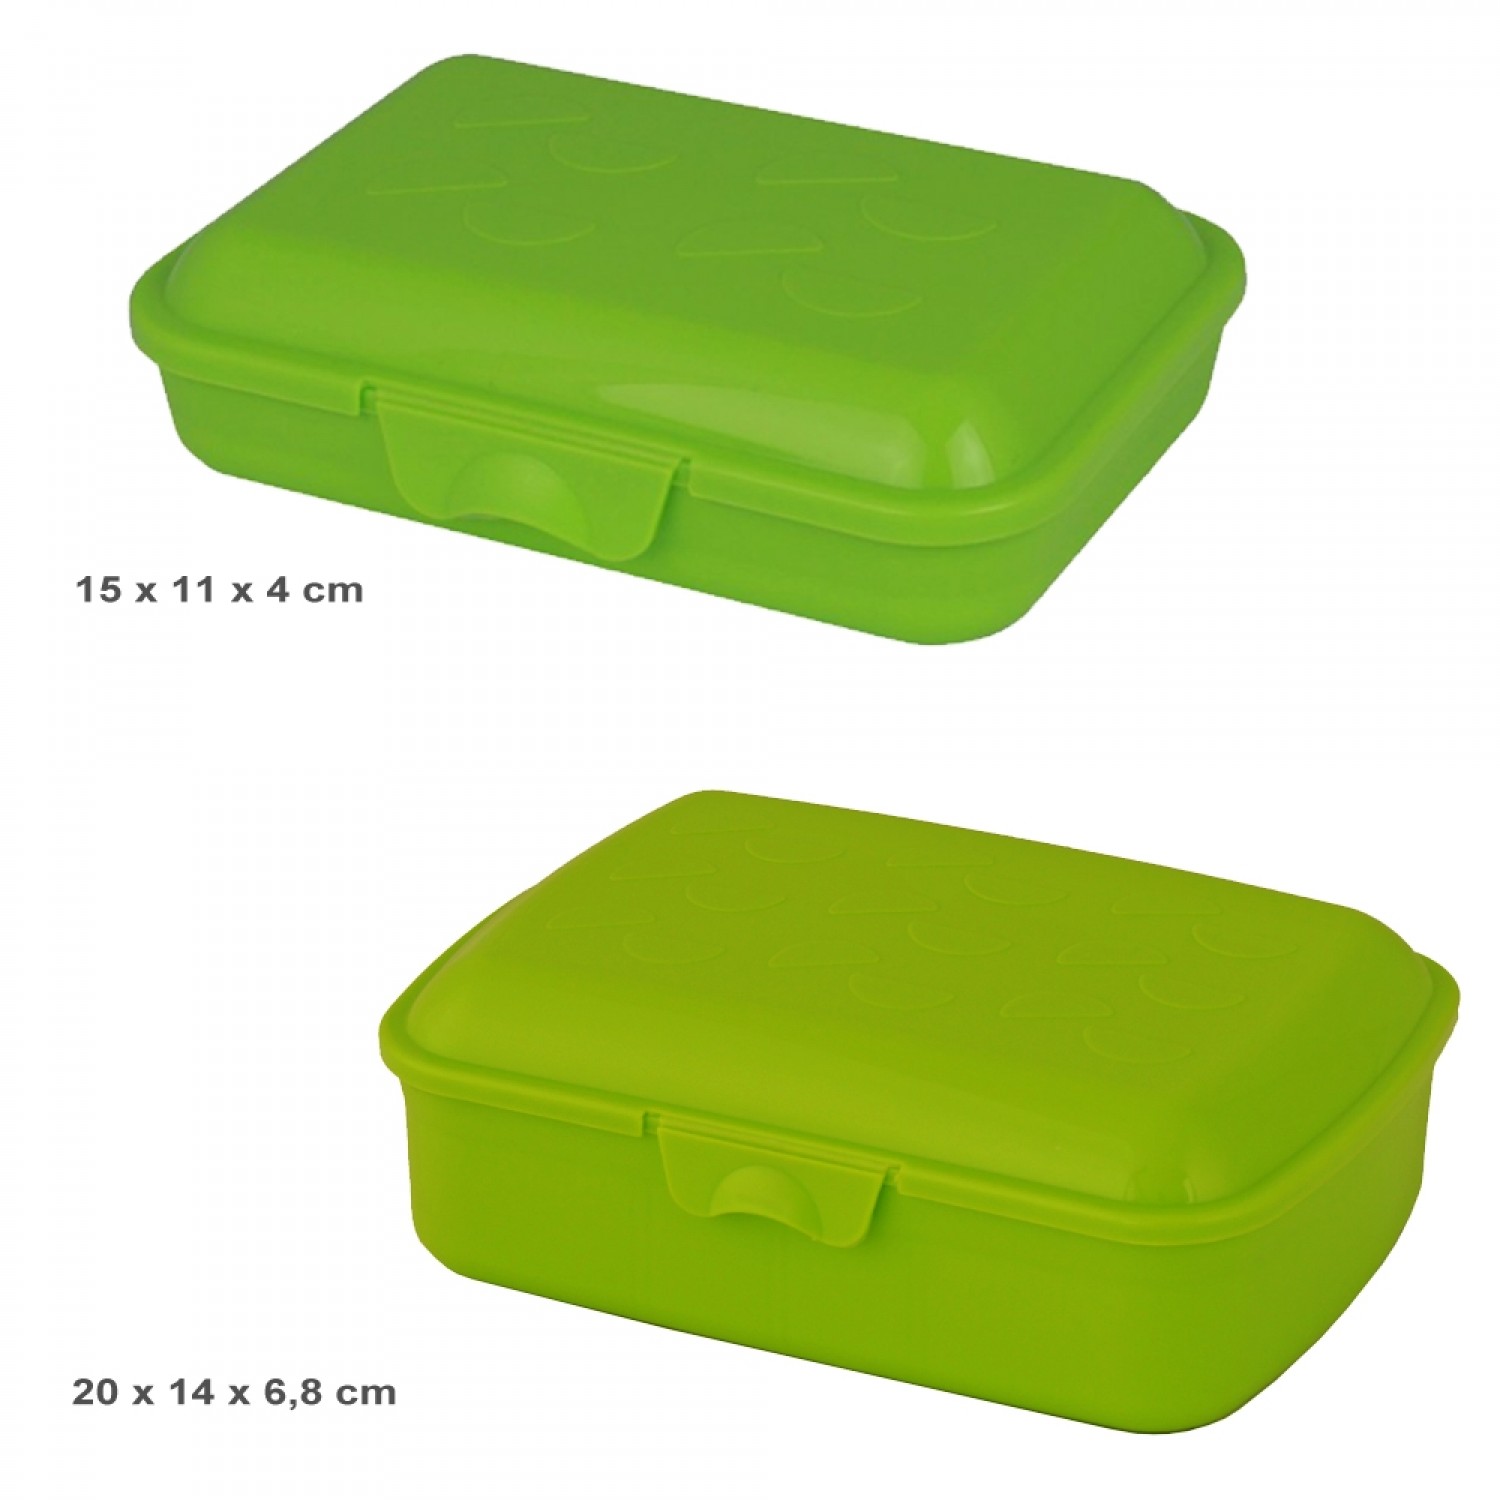 Greenline lunchbox with snap lock made of bioplastic | Gies